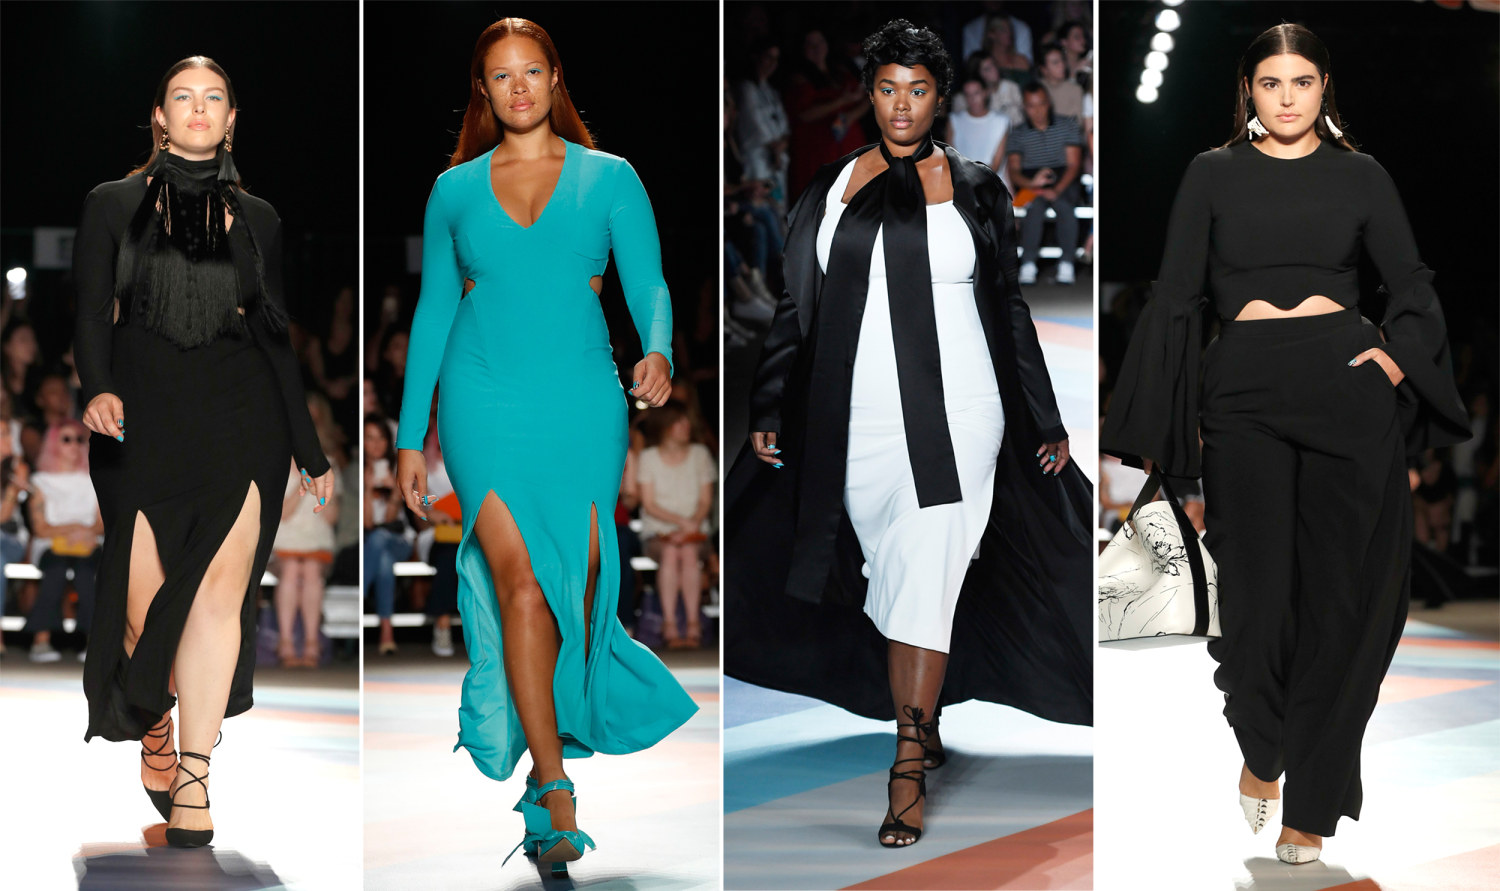 Christian Siriano sends 5 plus-size models down the runway